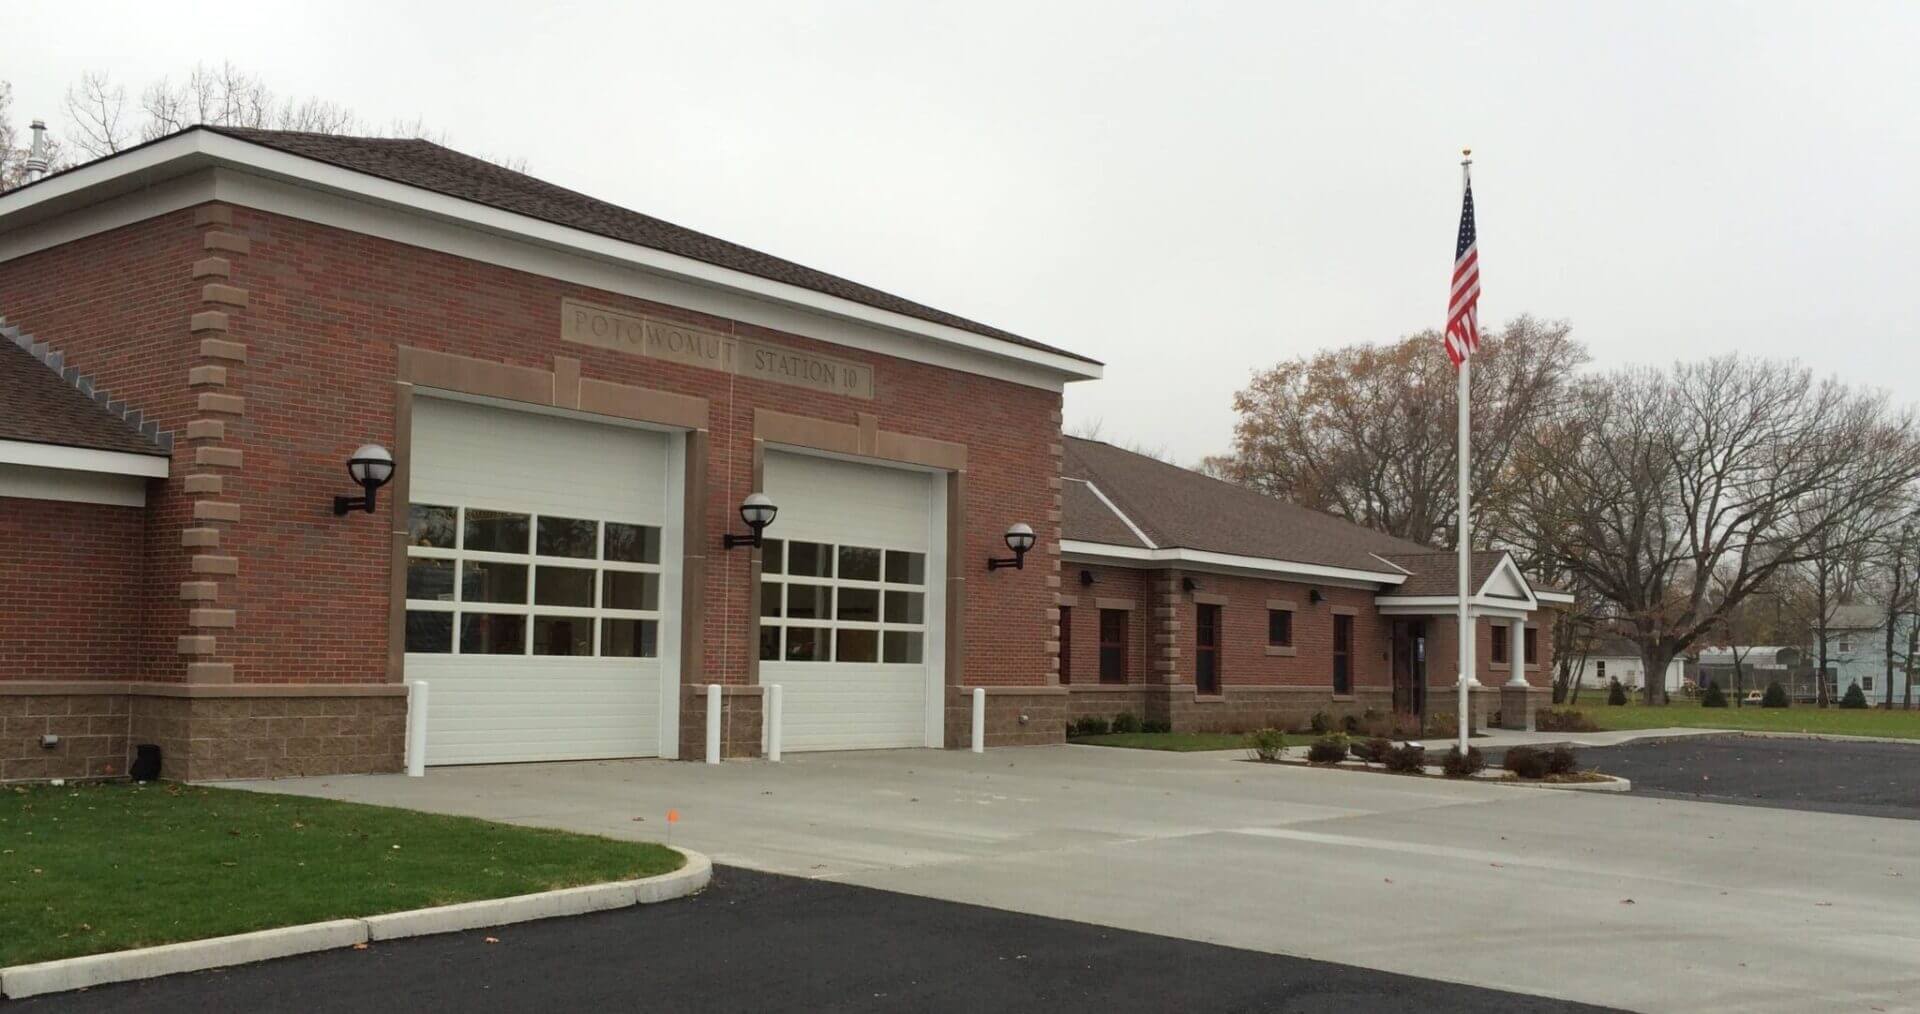 [CREDIT: Rob Borkowski] Potowomut Fire Station, built in 2015 on the site of the former Potowomut School.